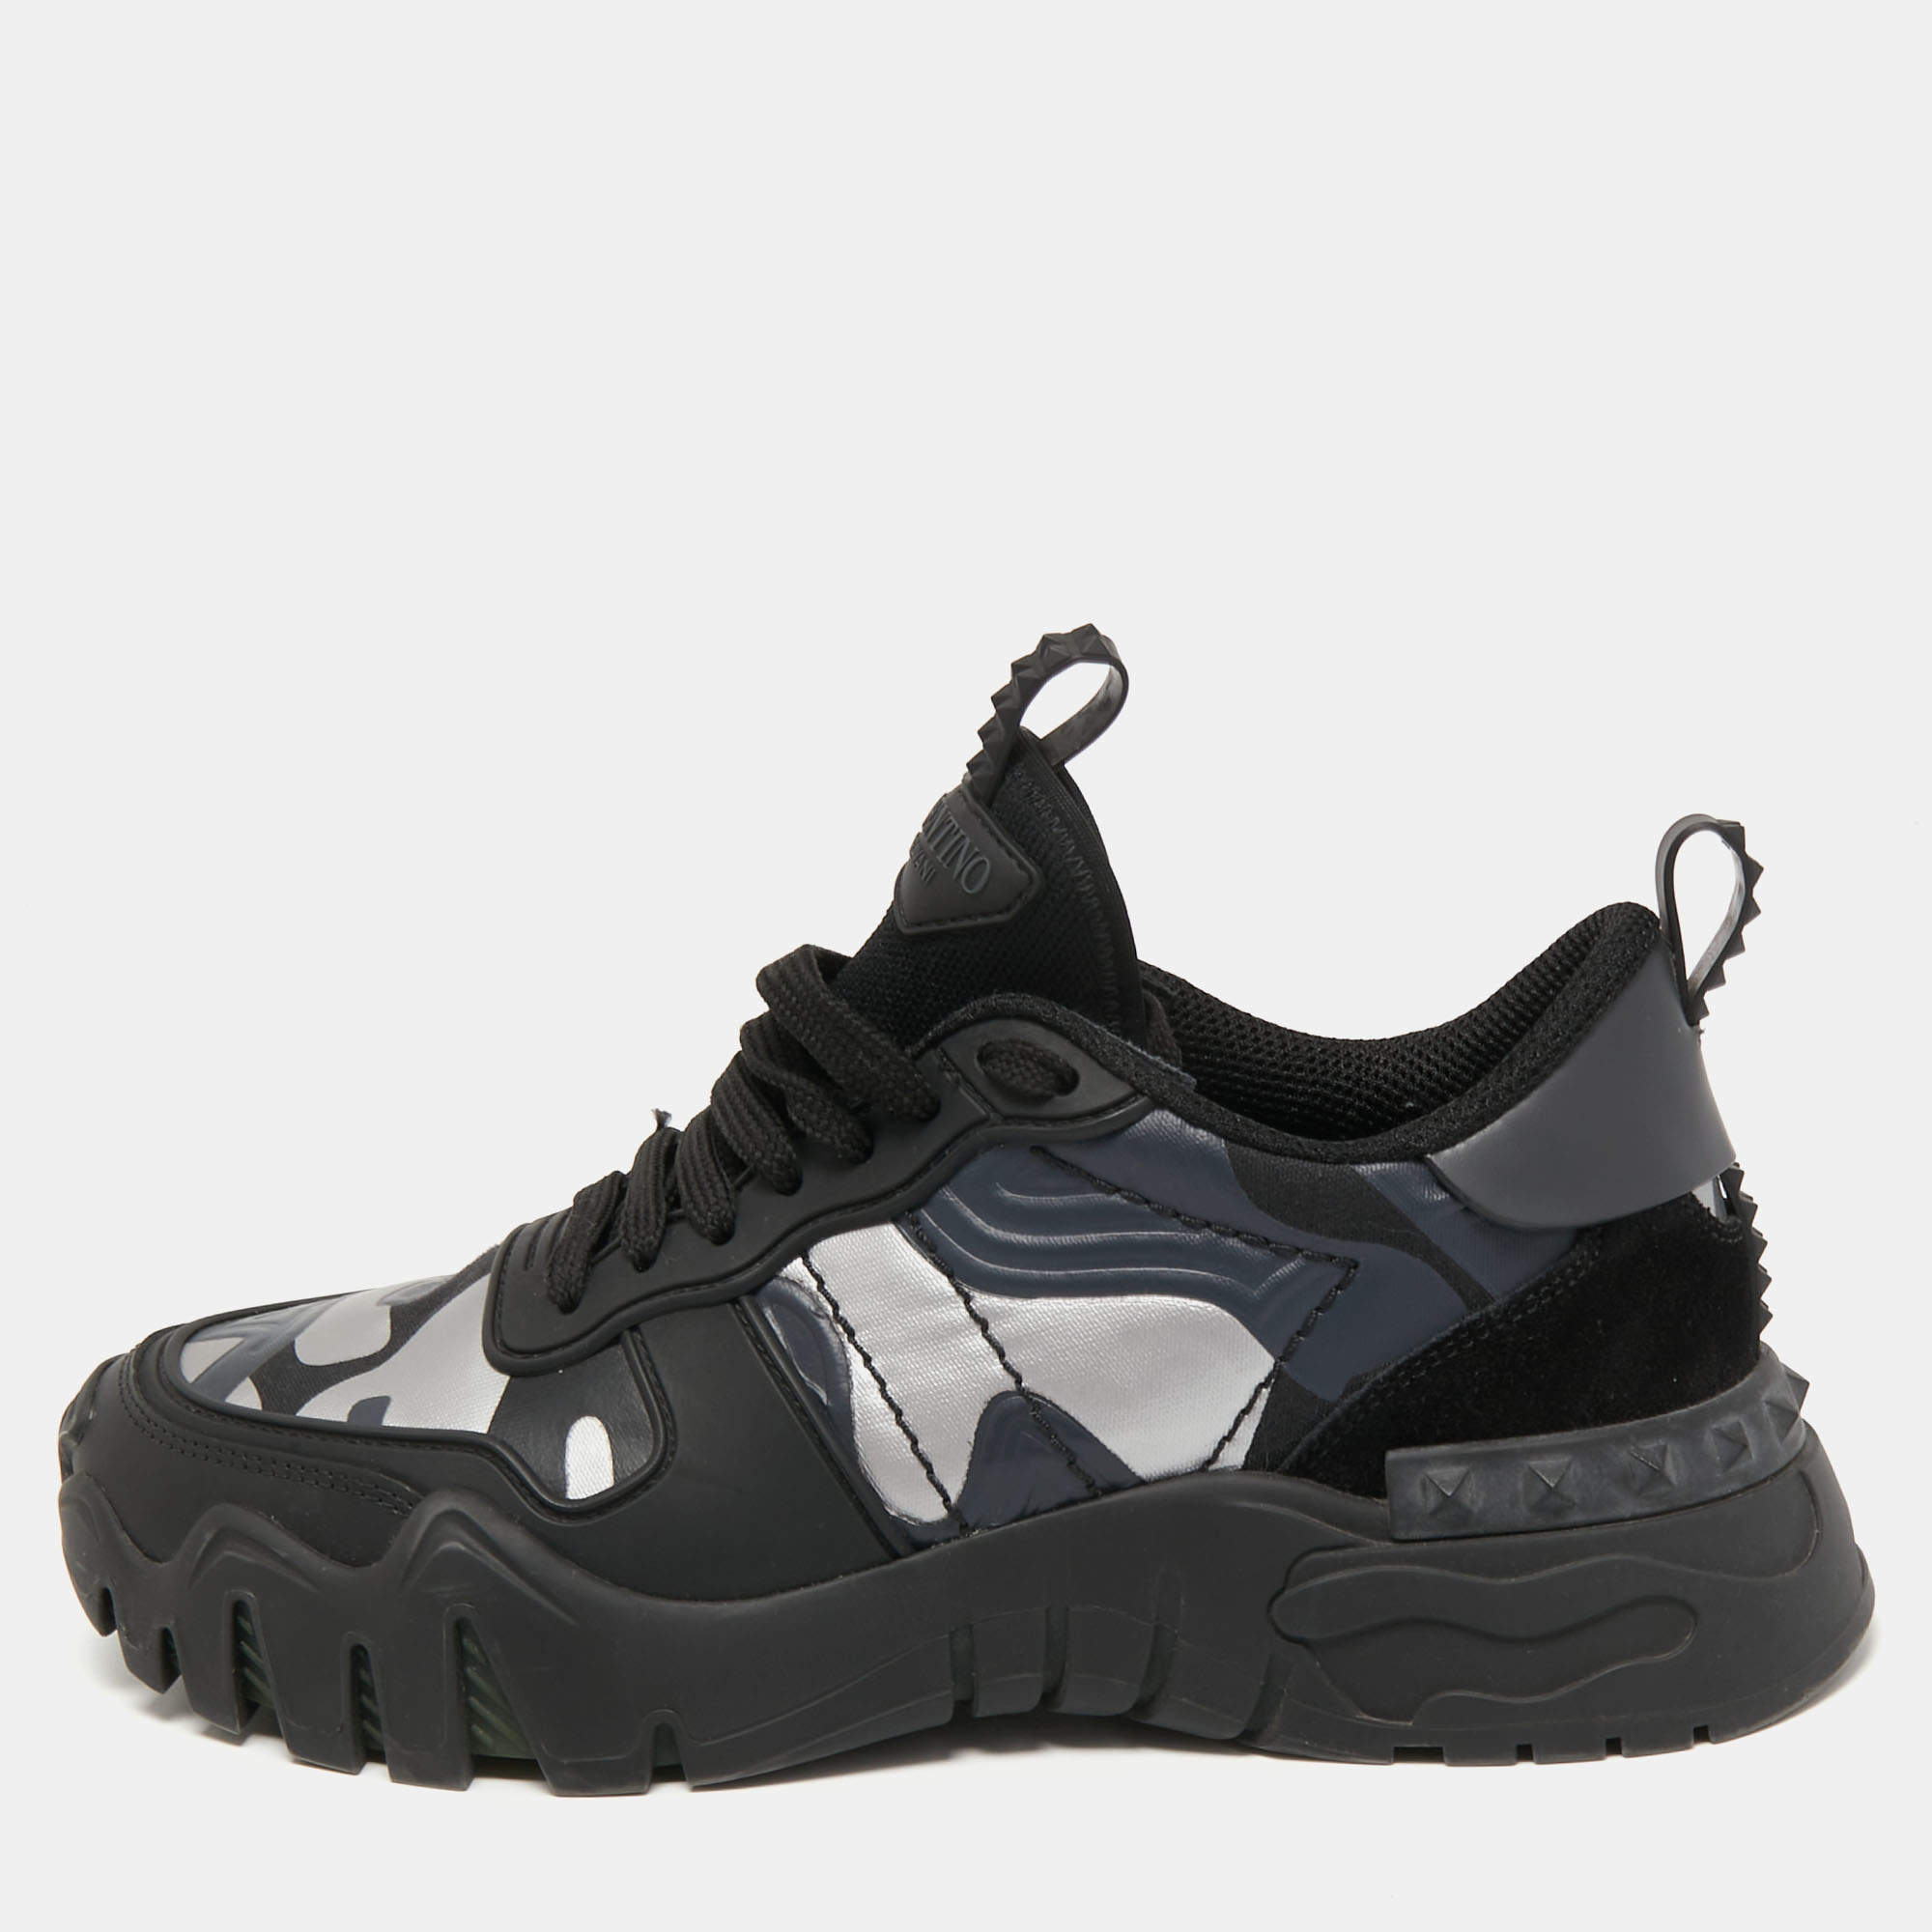 Valentino Black/Grey Camo Print Canvas and Leather Rockrunner Plus Sneakers Size 39